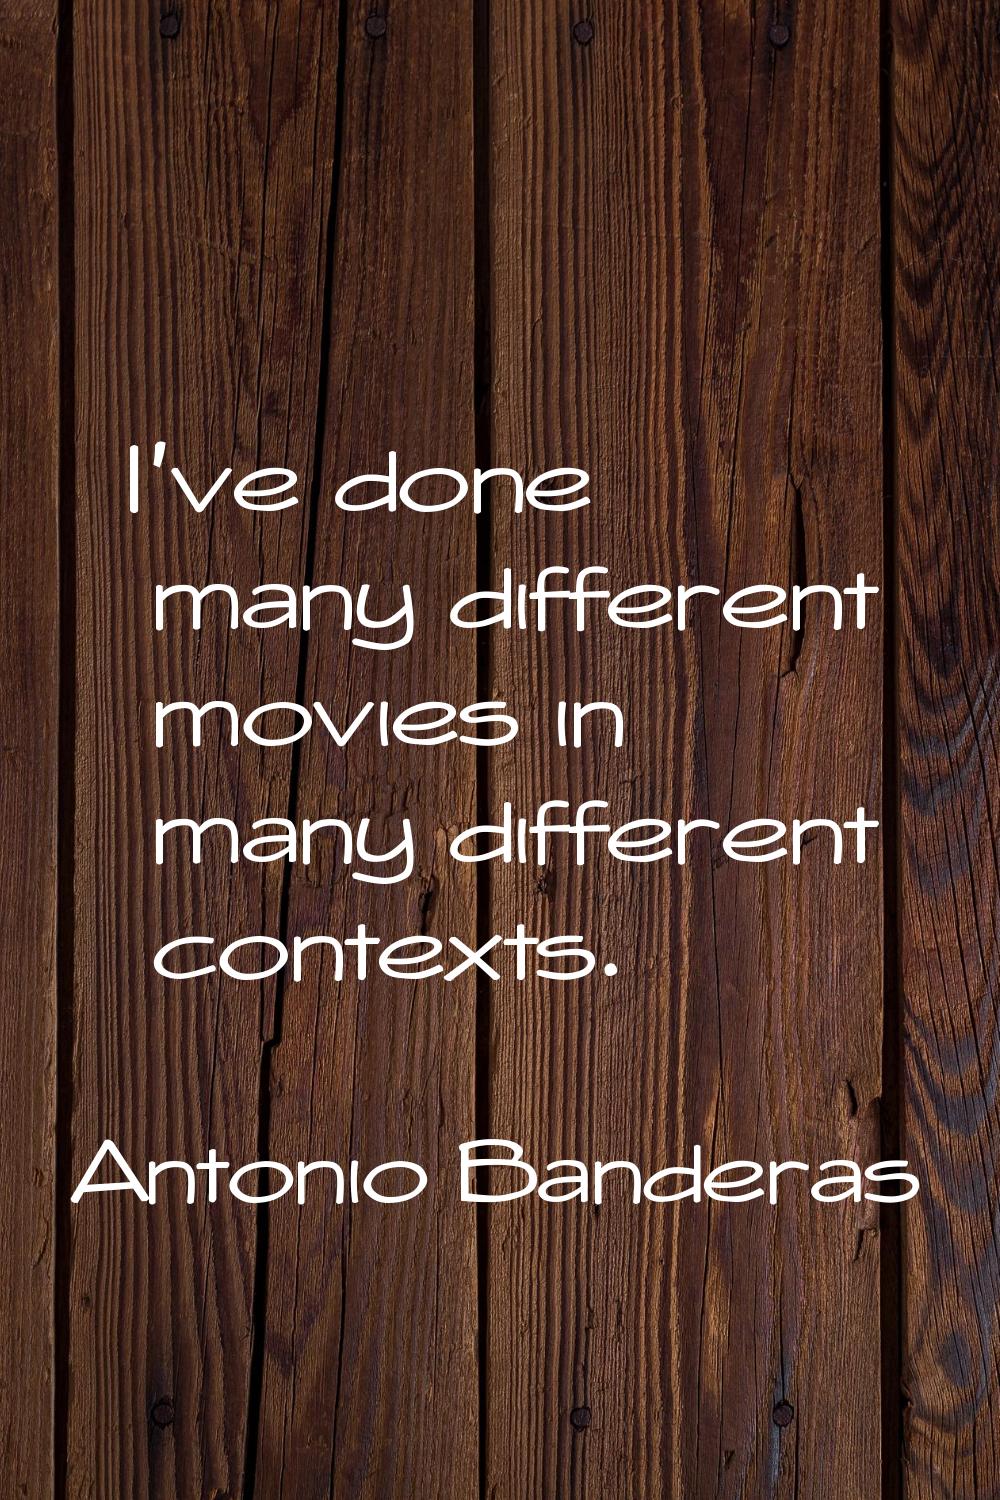 I've done many different movies in many different contexts.